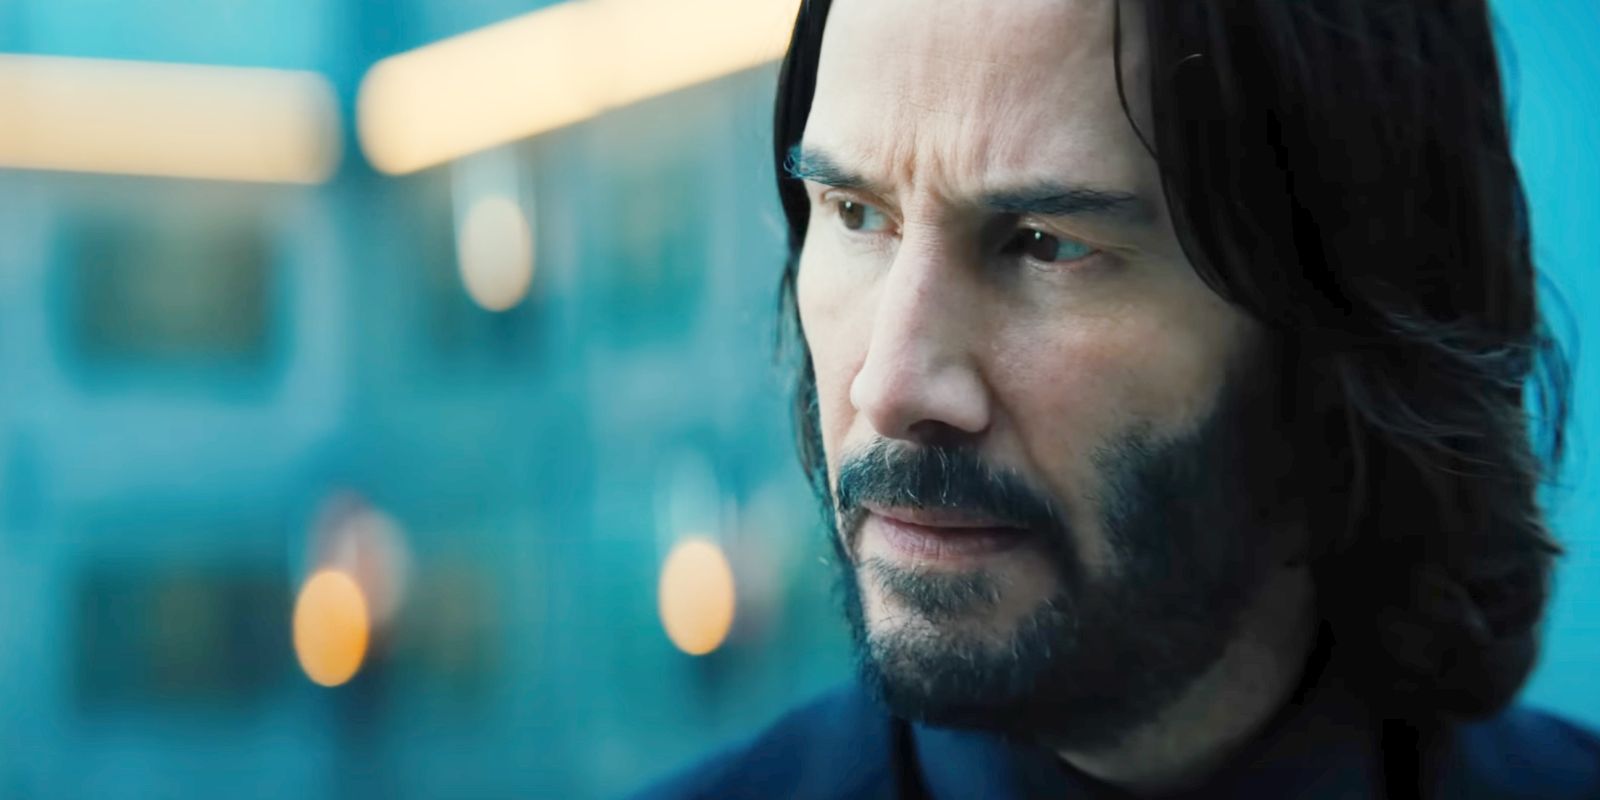 John Wick: Chapter 4' Review: Keanu Reeves Shines, Script Is Painful